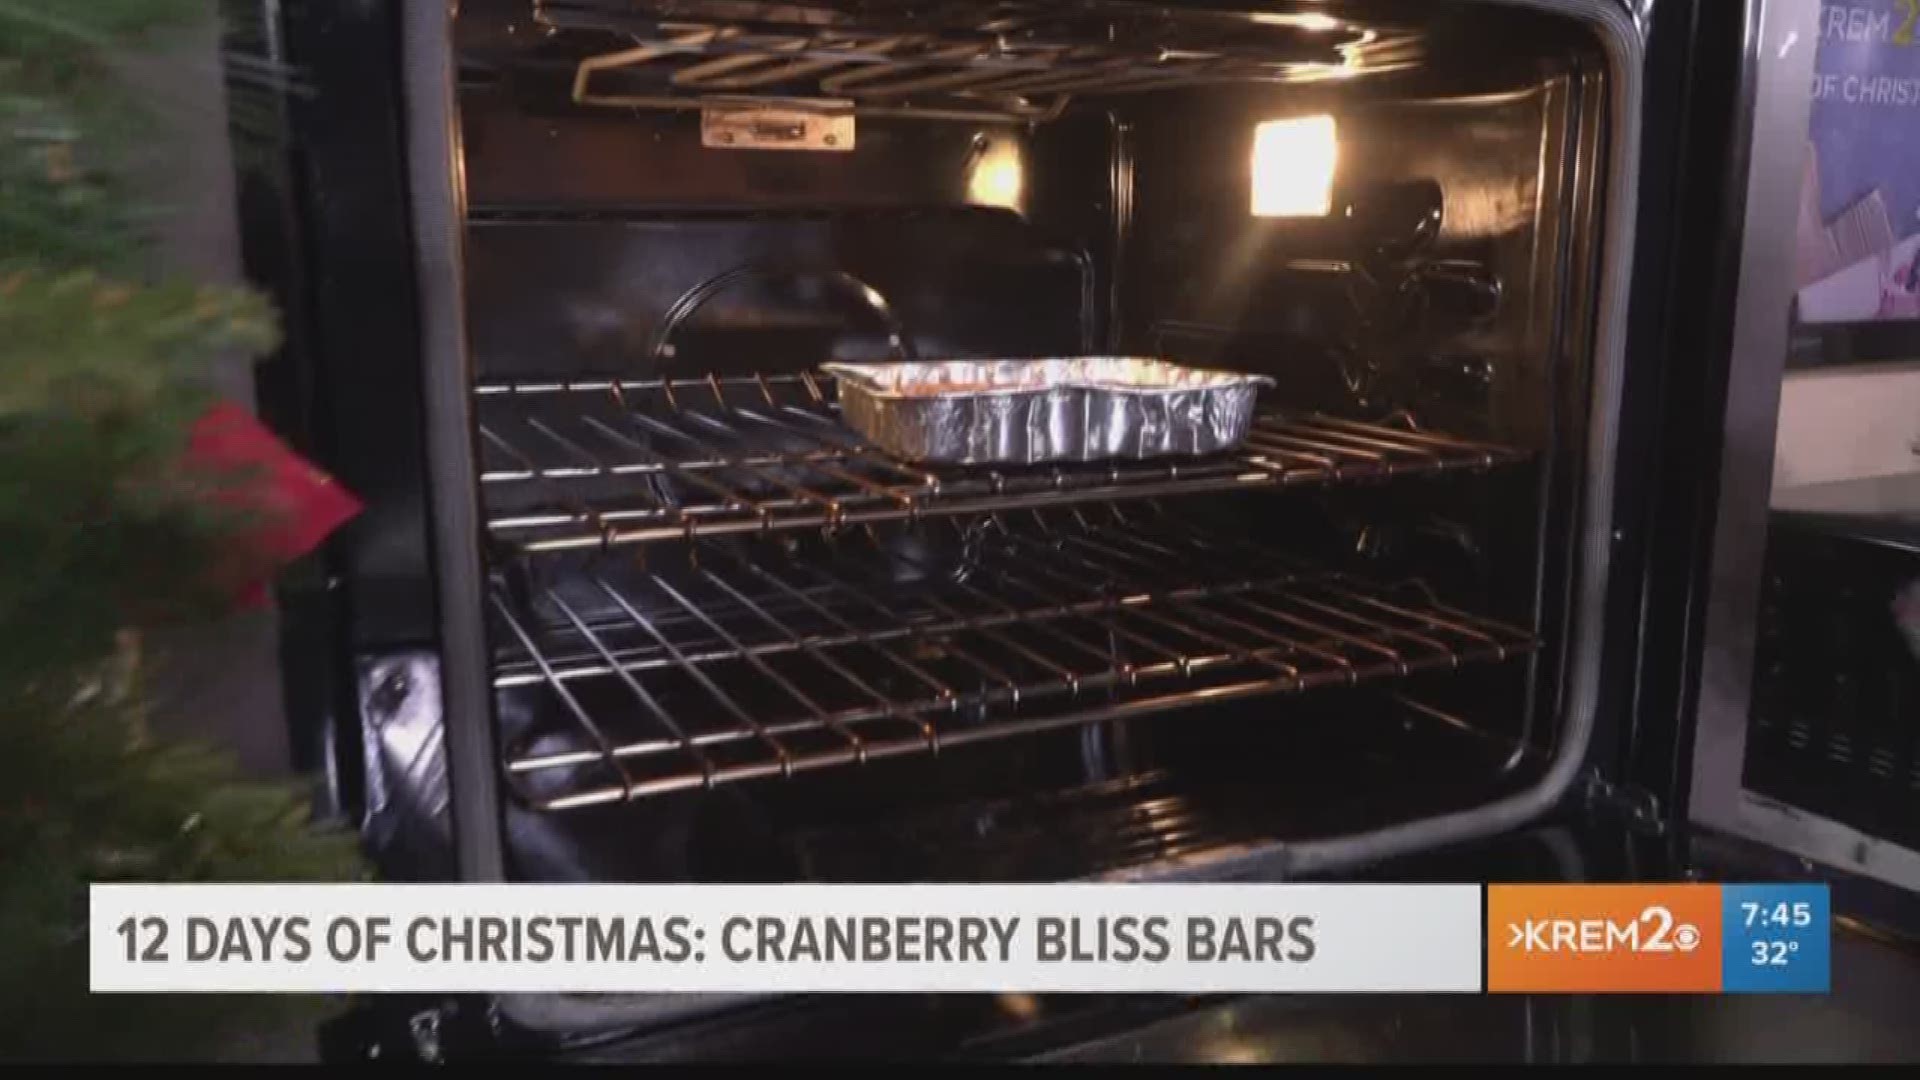 One of the best parts of the holiday season is the food, but trying a new recipe can be stressful. So the KREM 2 Morning News crew is sharing their go-to recipes.